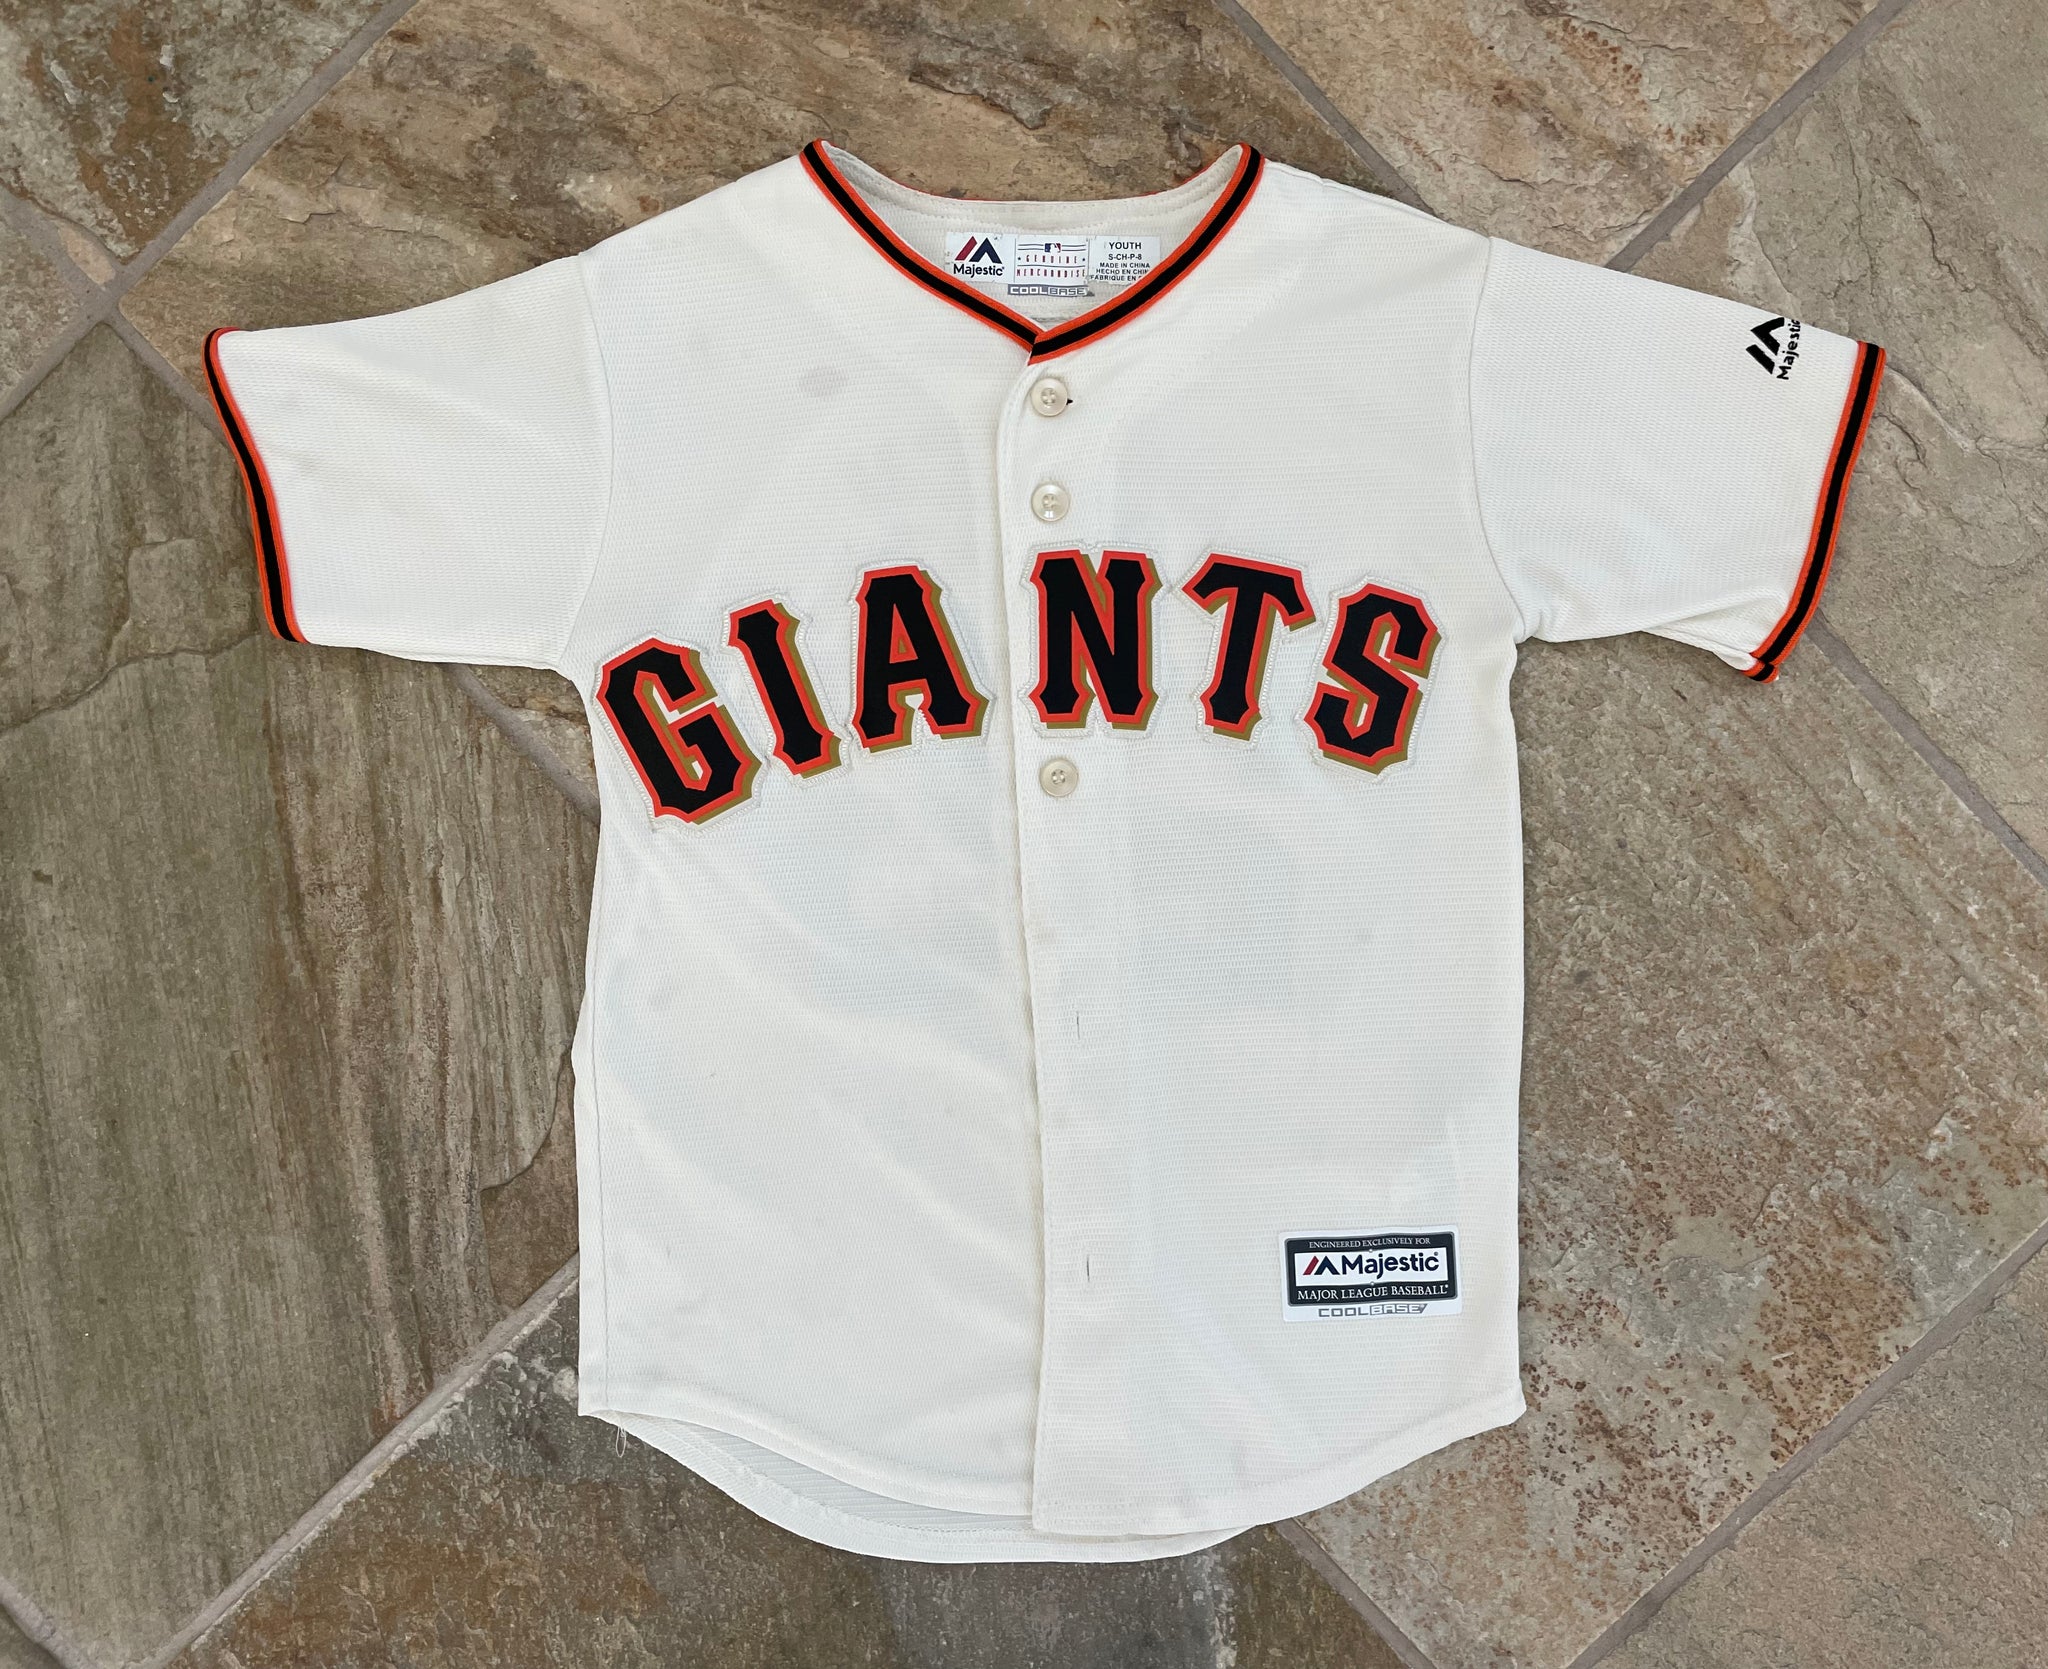 youth posey jersey